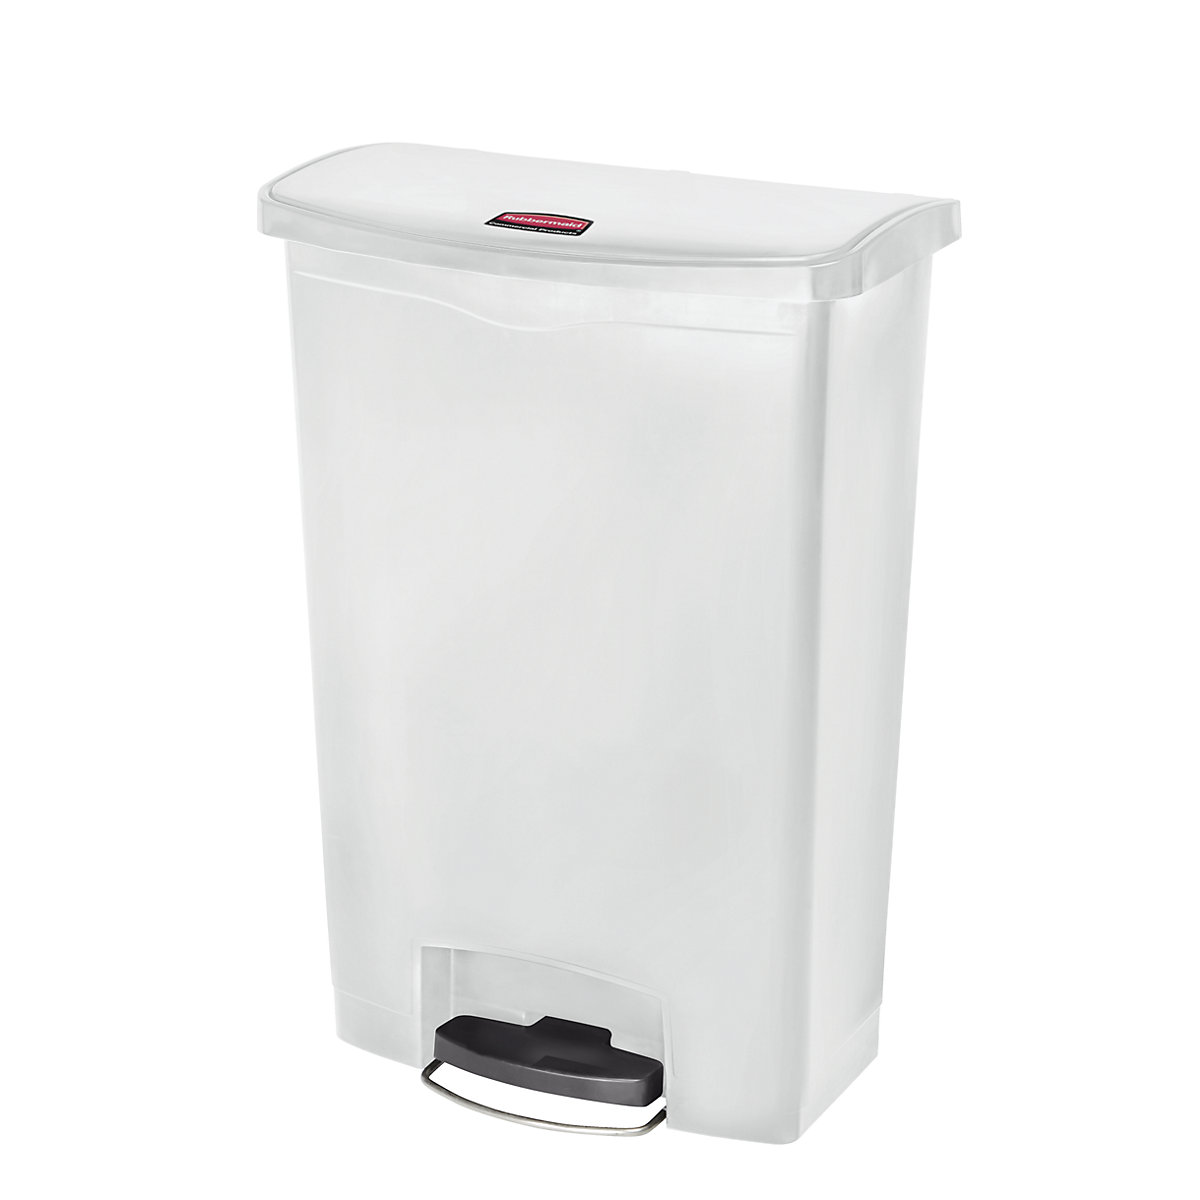 SLIM JIM® waste collector with pedal – Rubbermaid